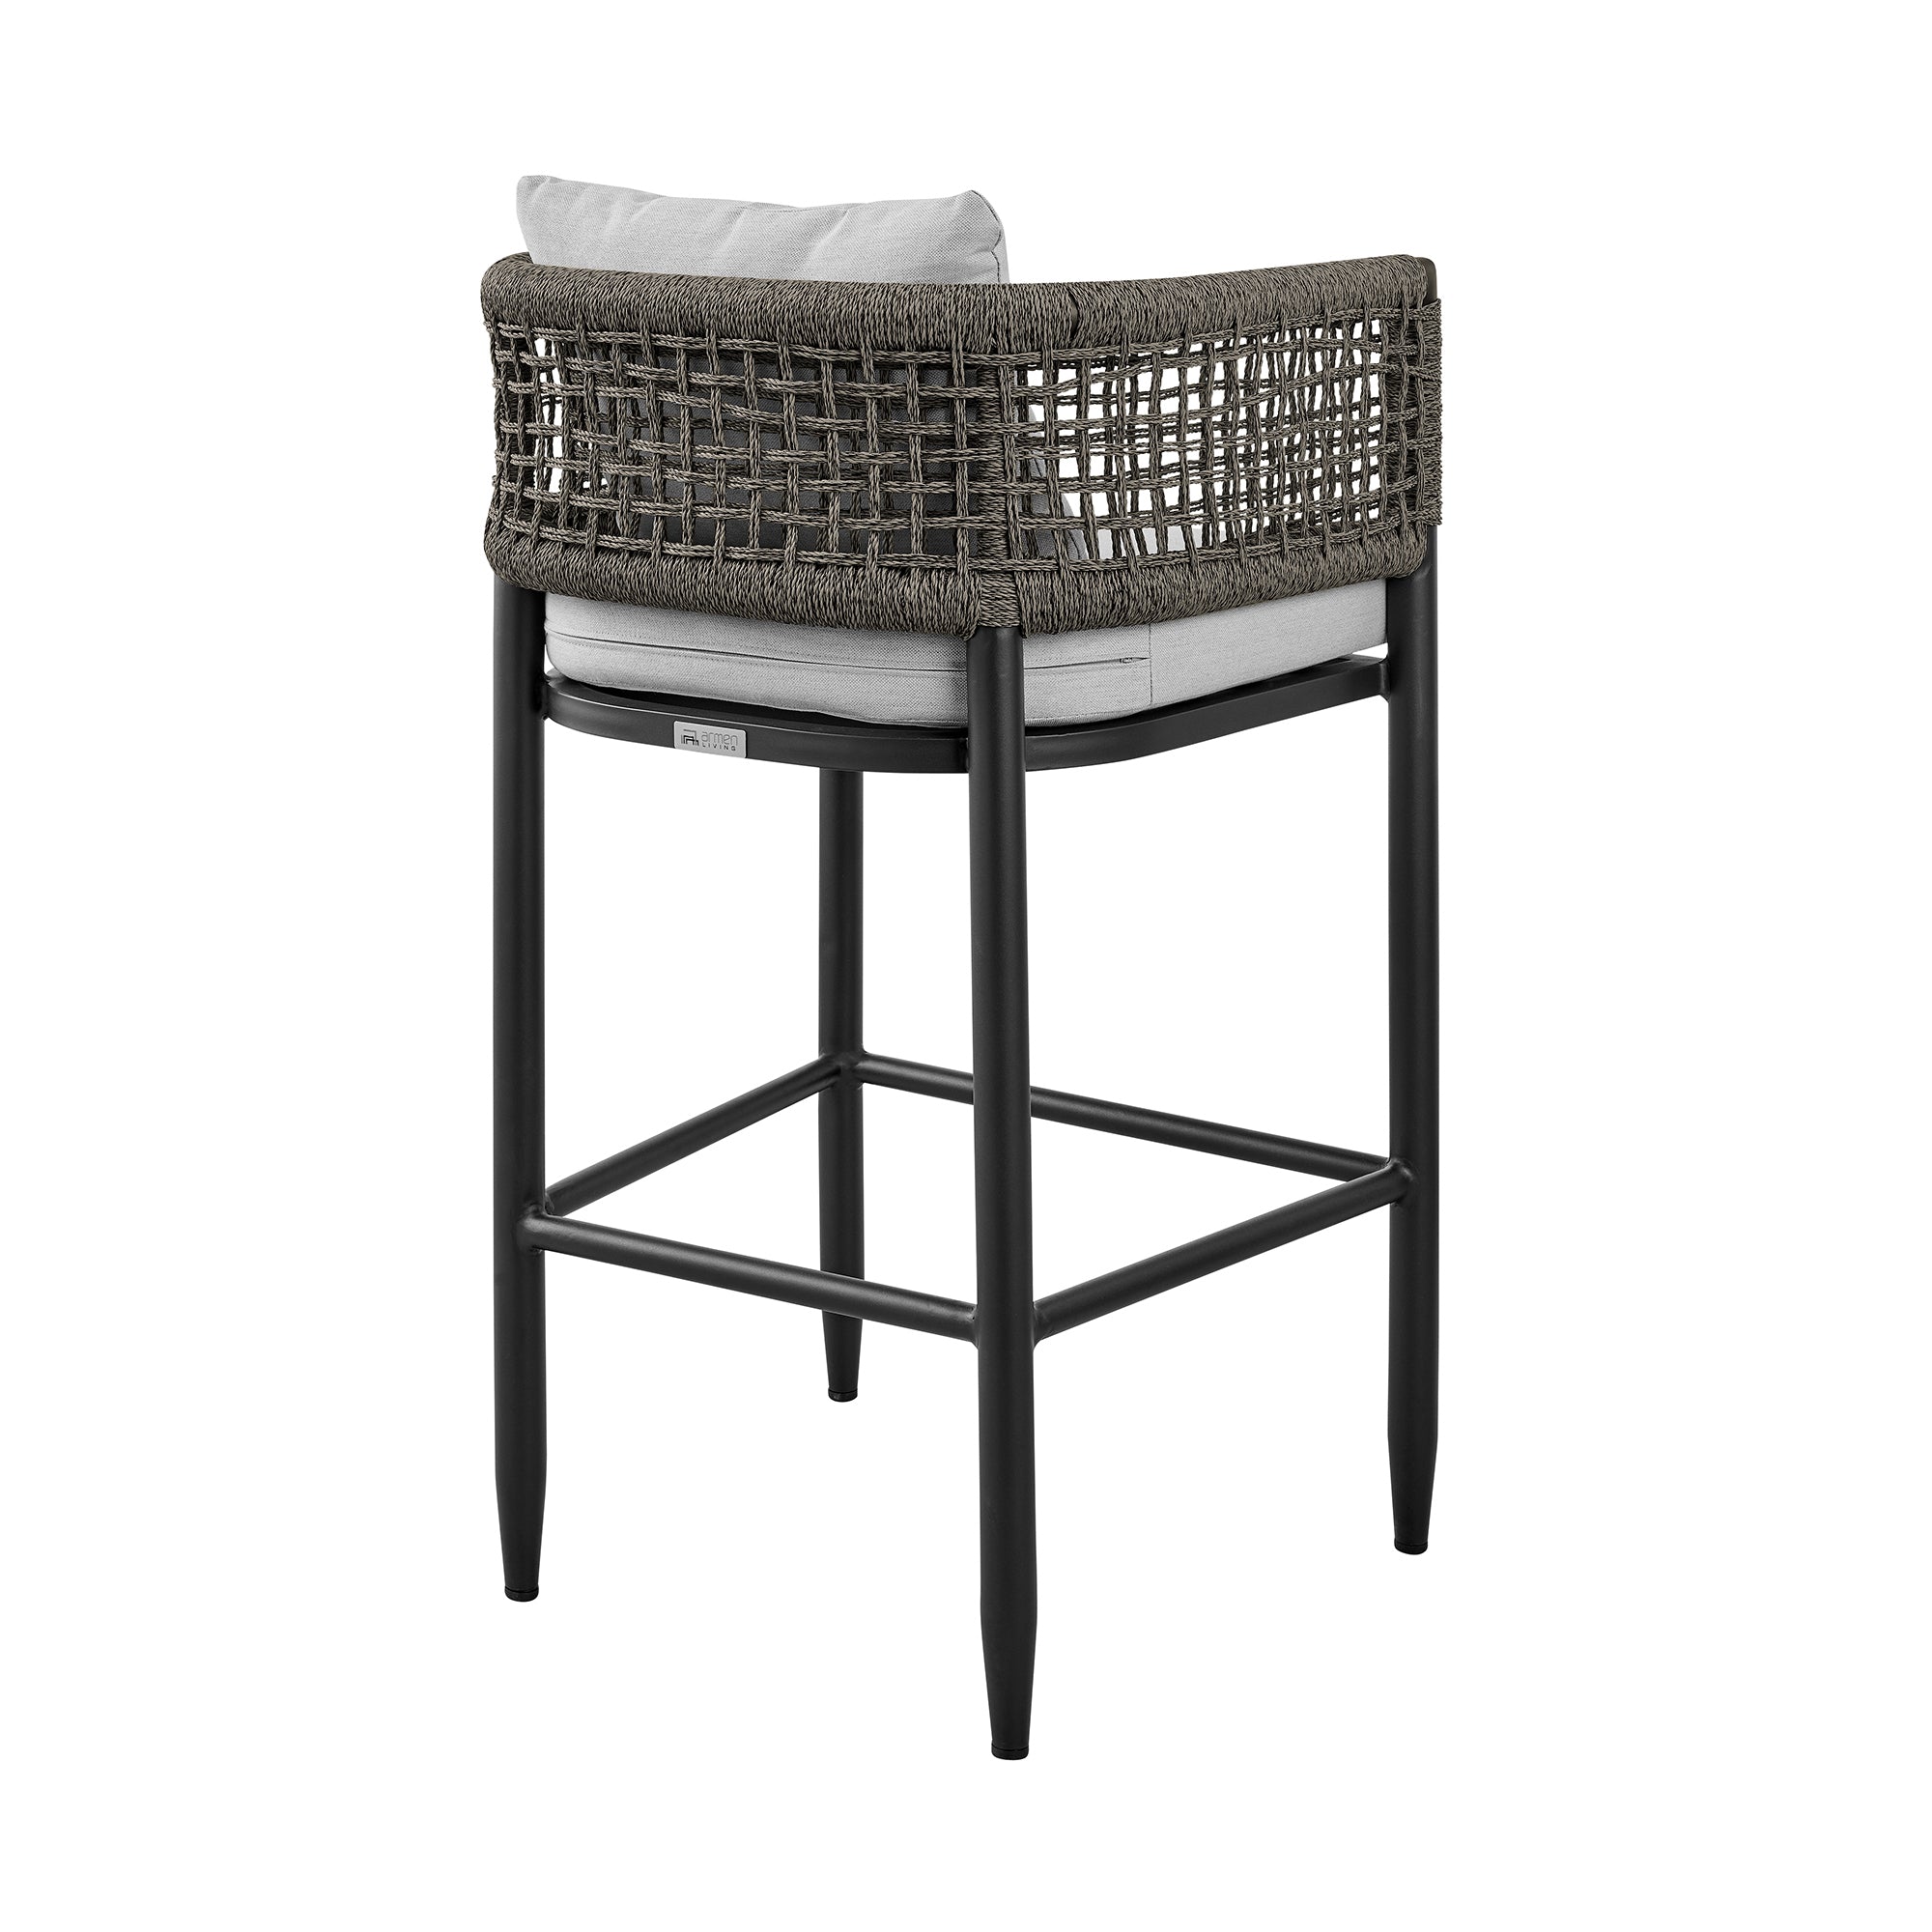 Armen Living - Felicia Outdoor Patio 5-Piece Bar Table Set in Aluminum with Grey Rope and Cushions - 840254333130